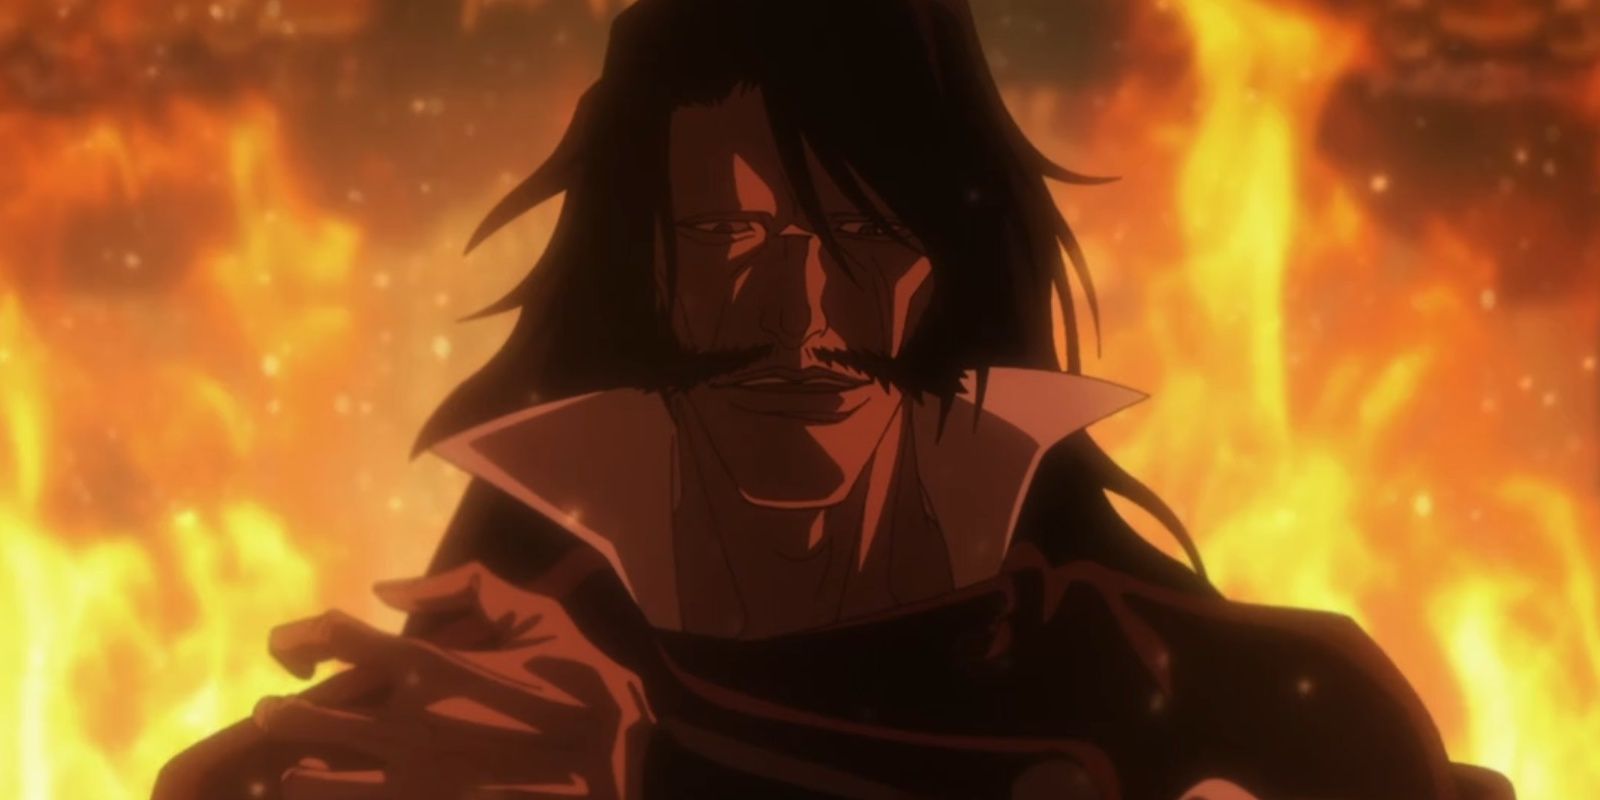 Yhwach talking while standing in flames in Bleach.